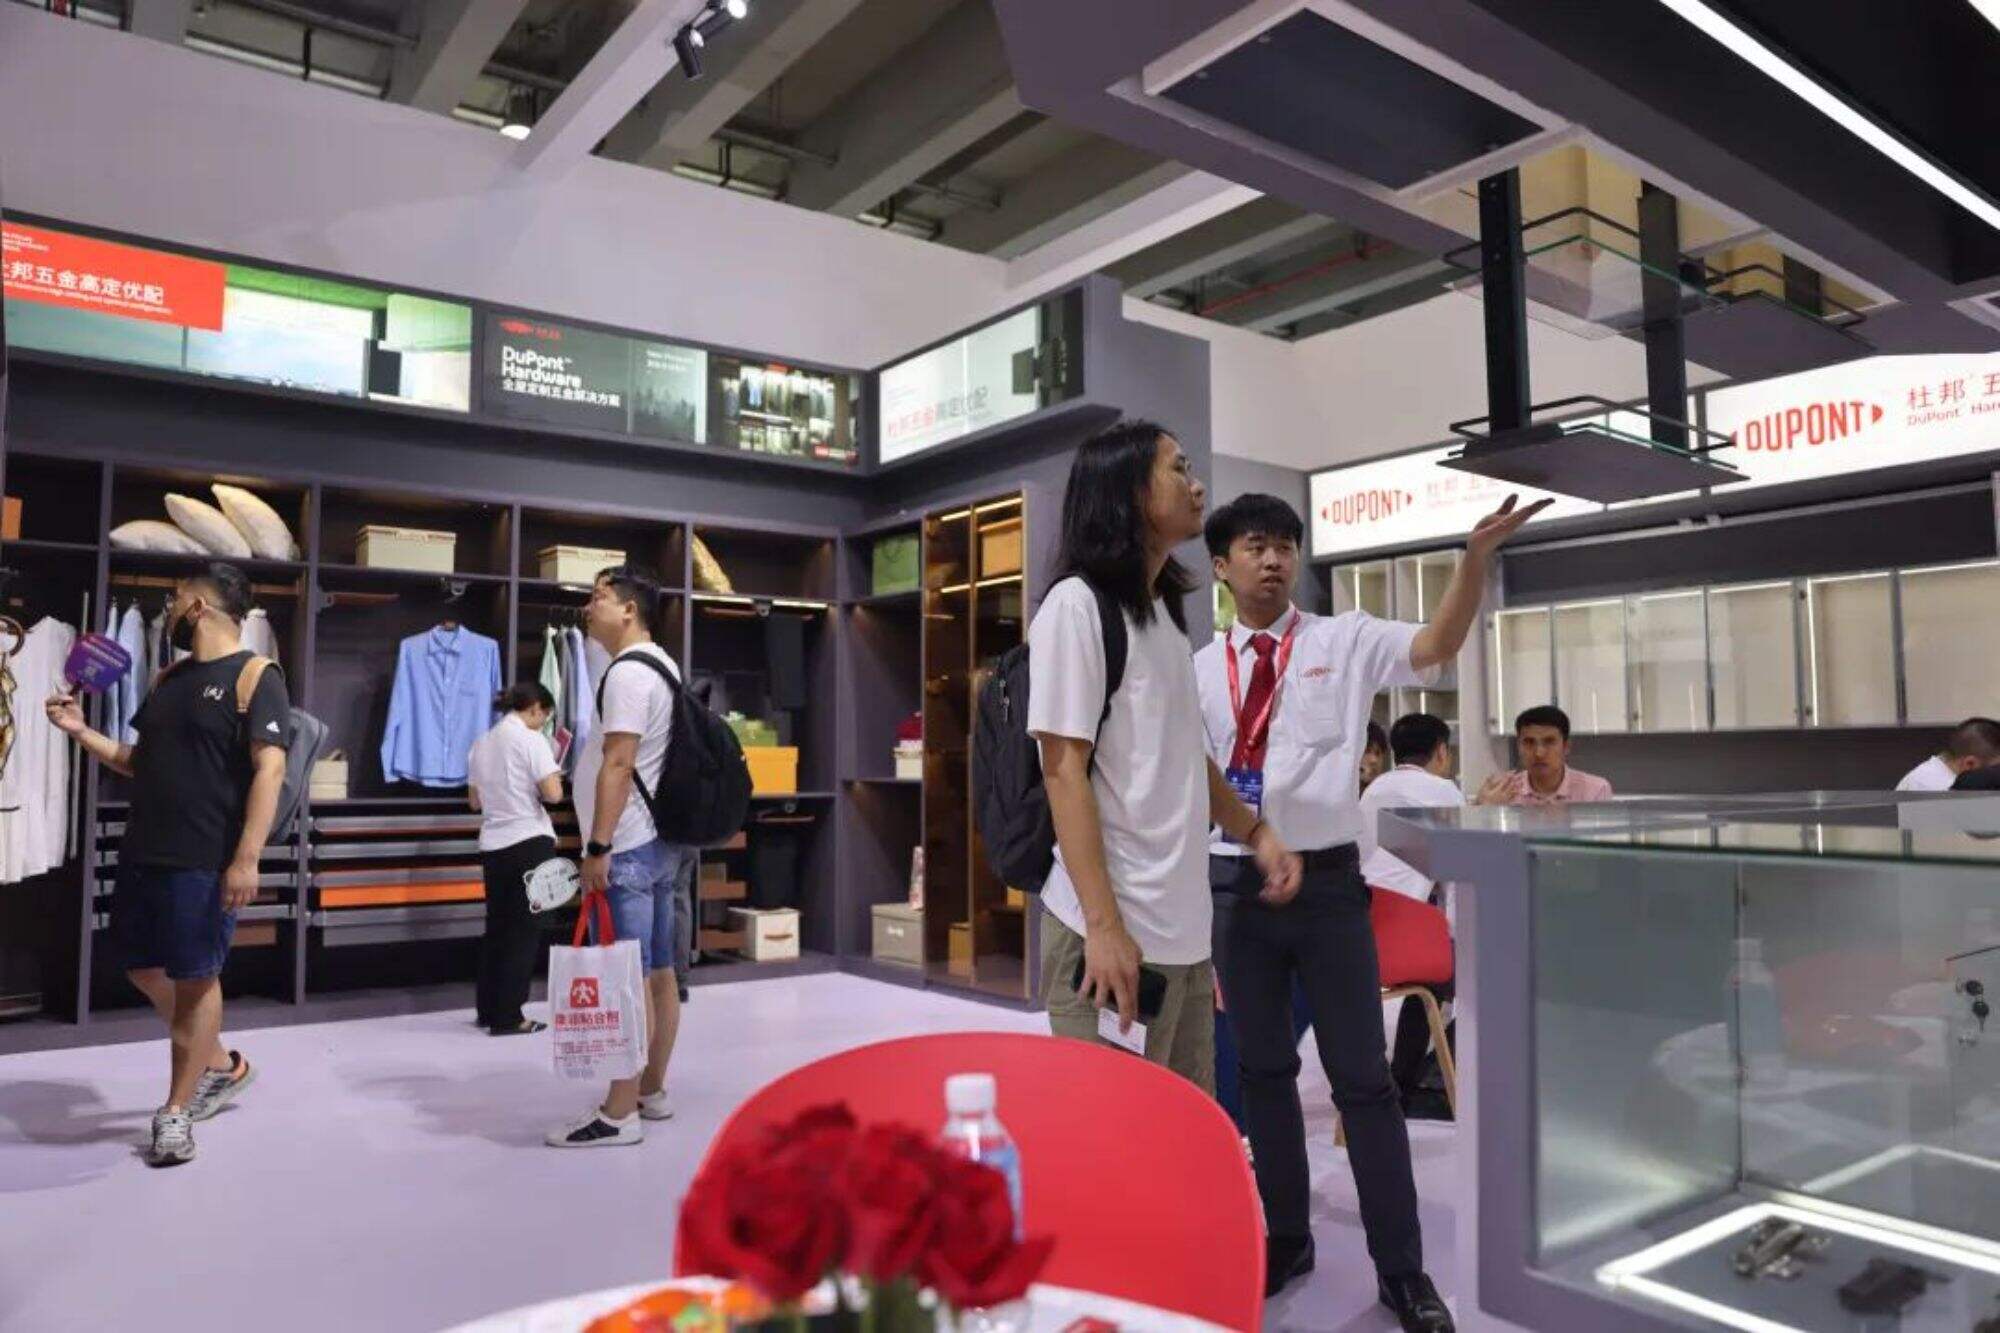 At the 25th China Construction Expo (Guangzhou), DuPont Hardware was stunning and gained a lot of popularity!